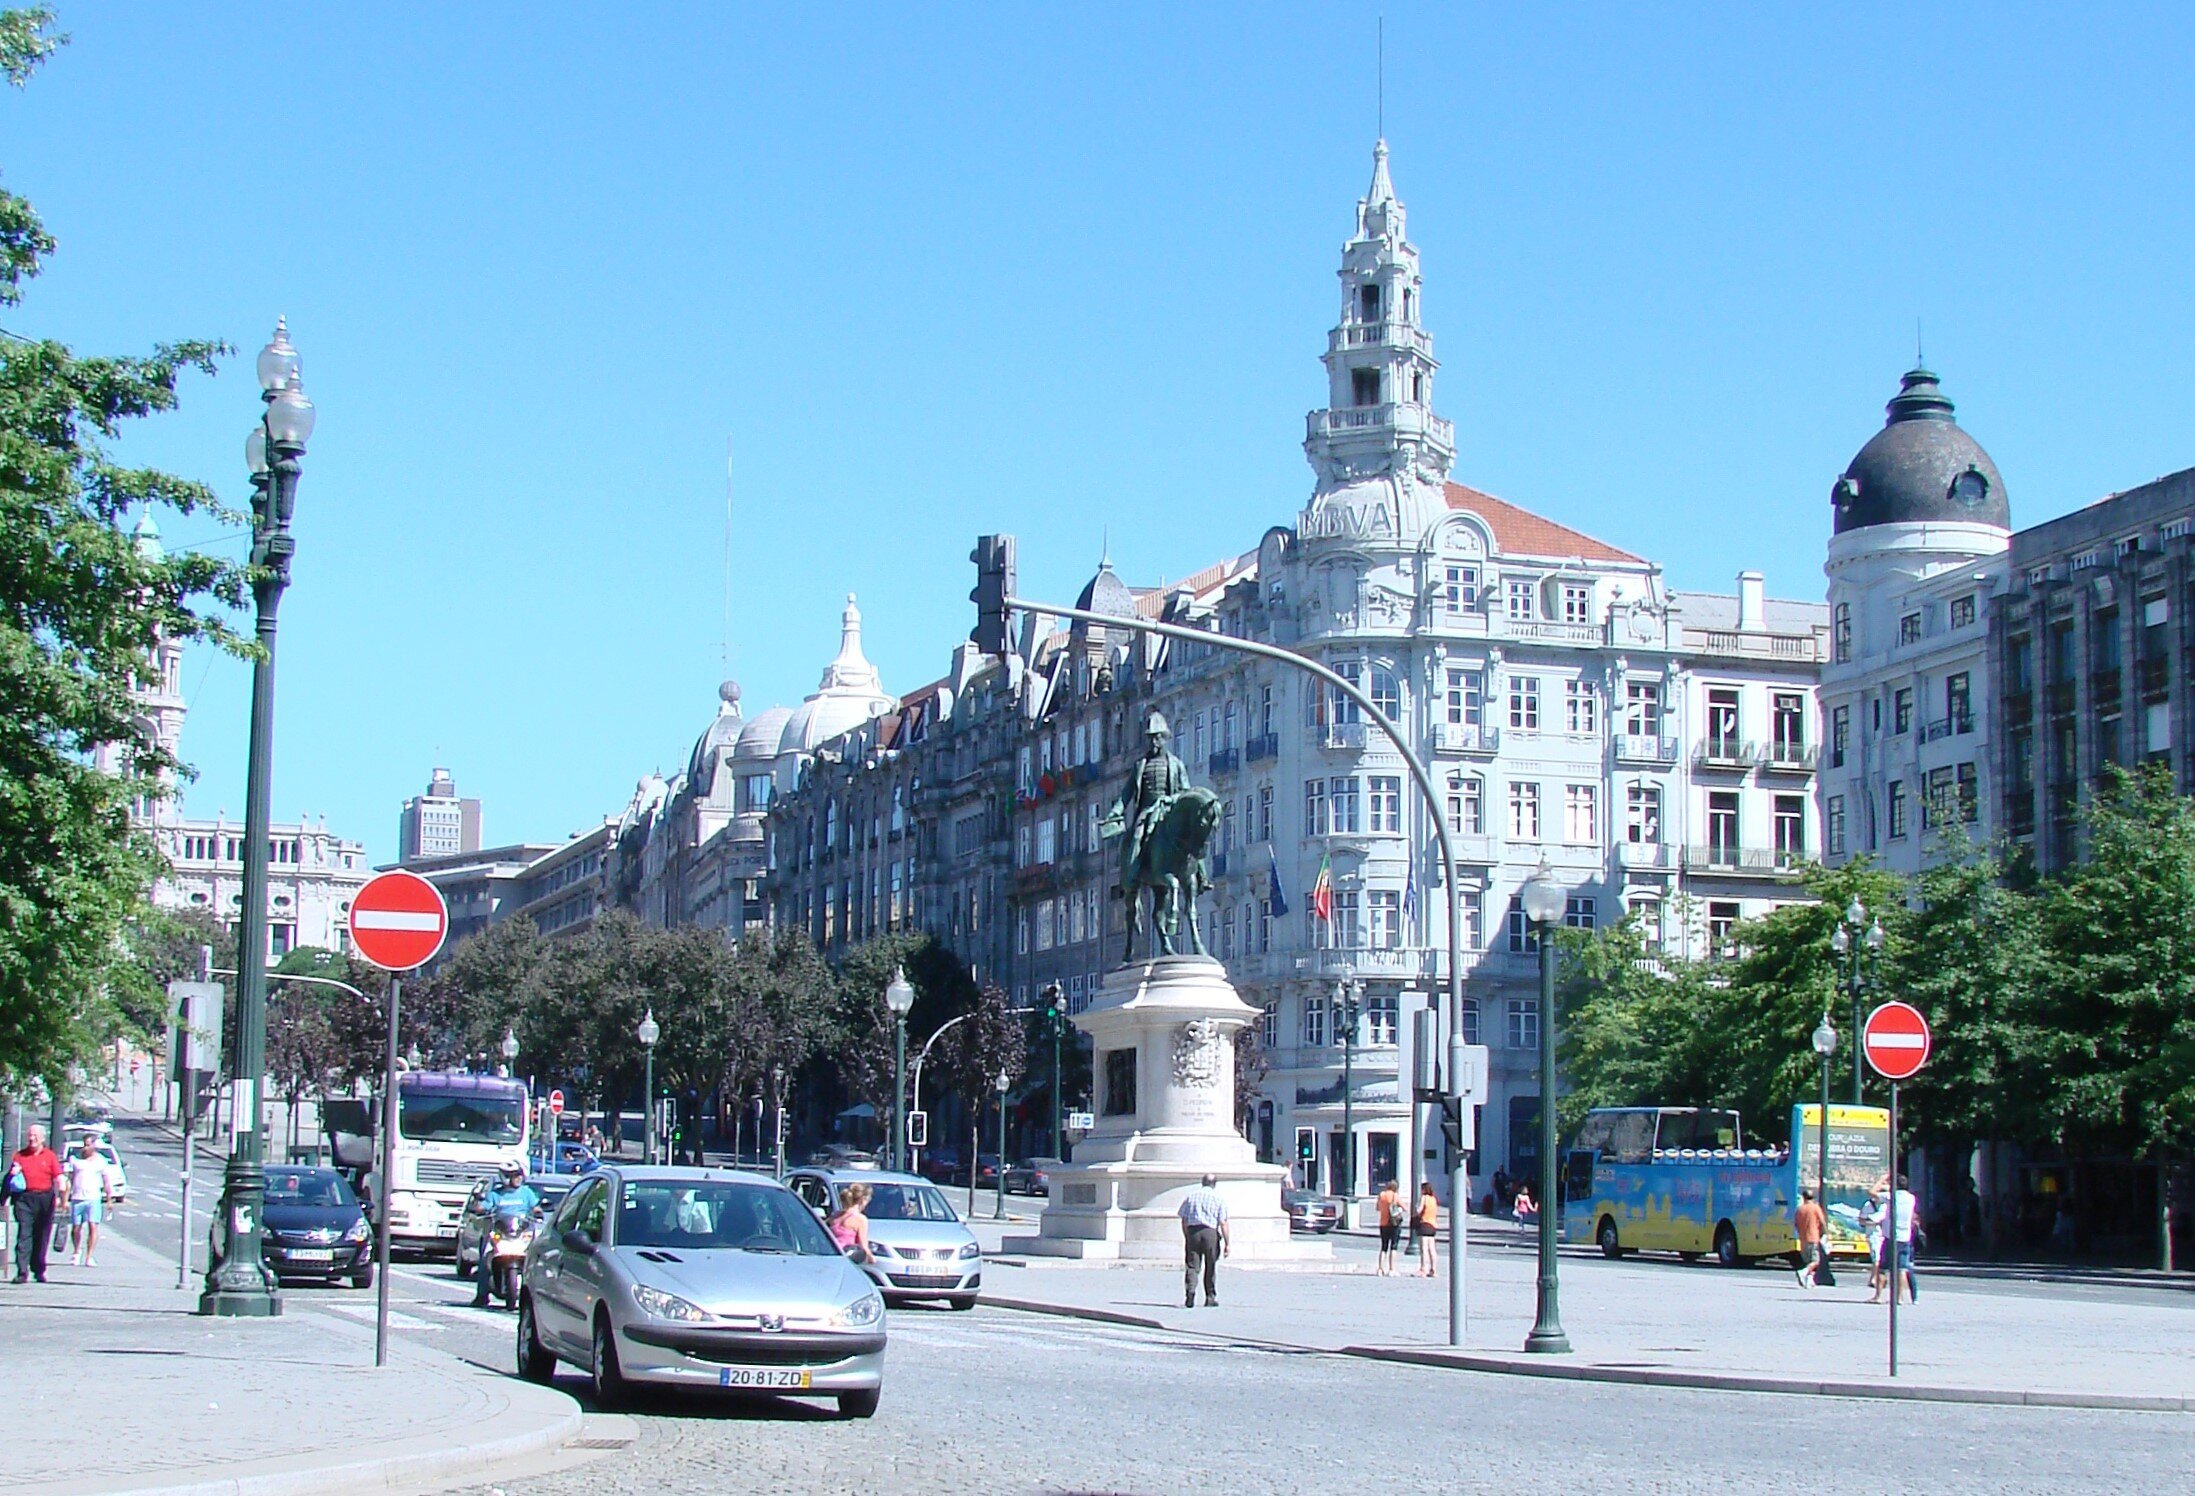 Porto sights: what to see in one day